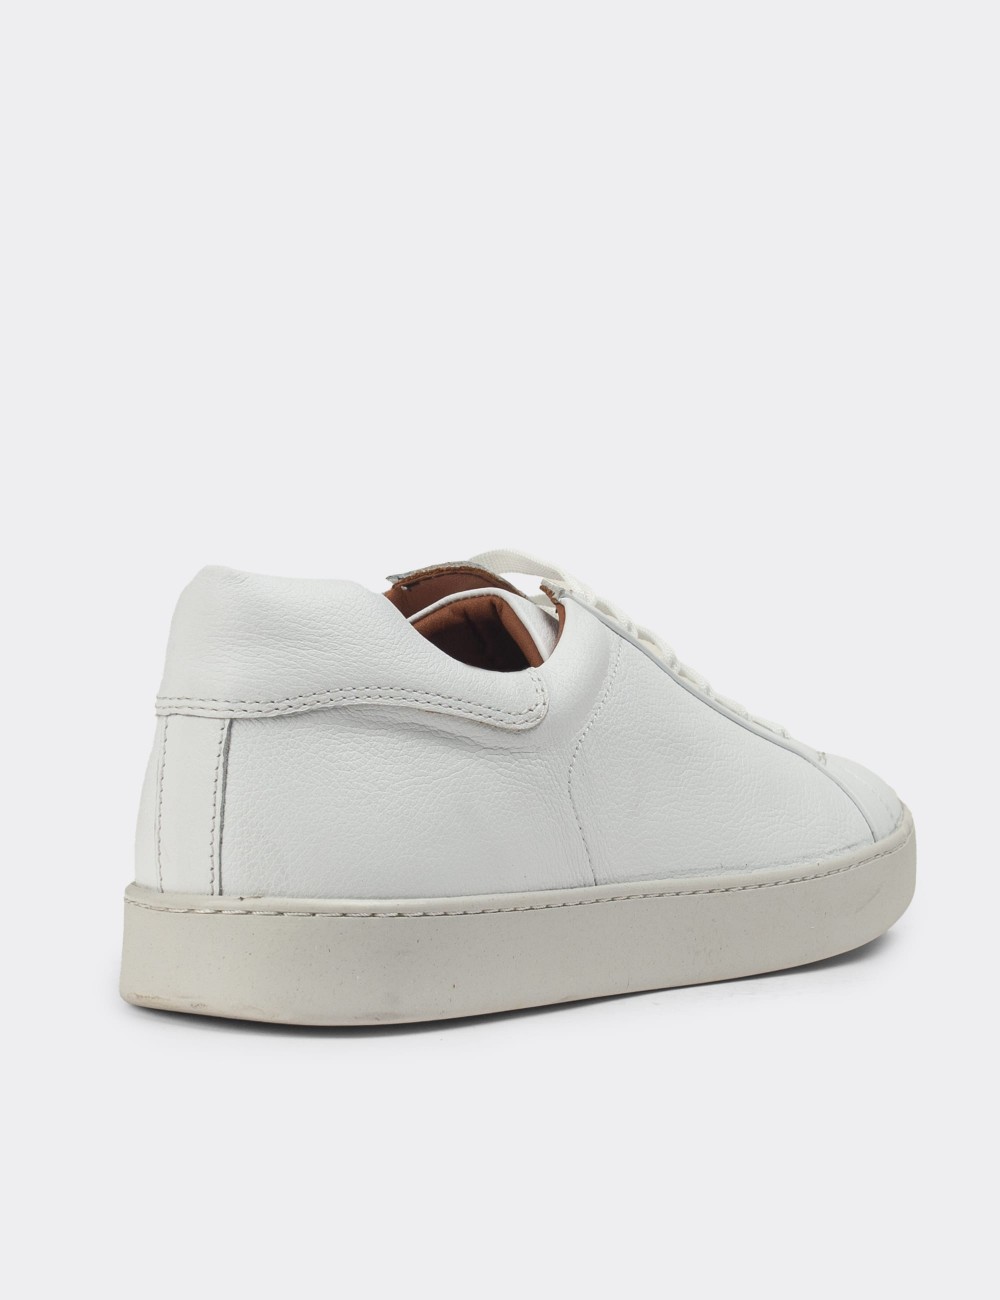 White Leather Sneakers - 01829MBYZC12